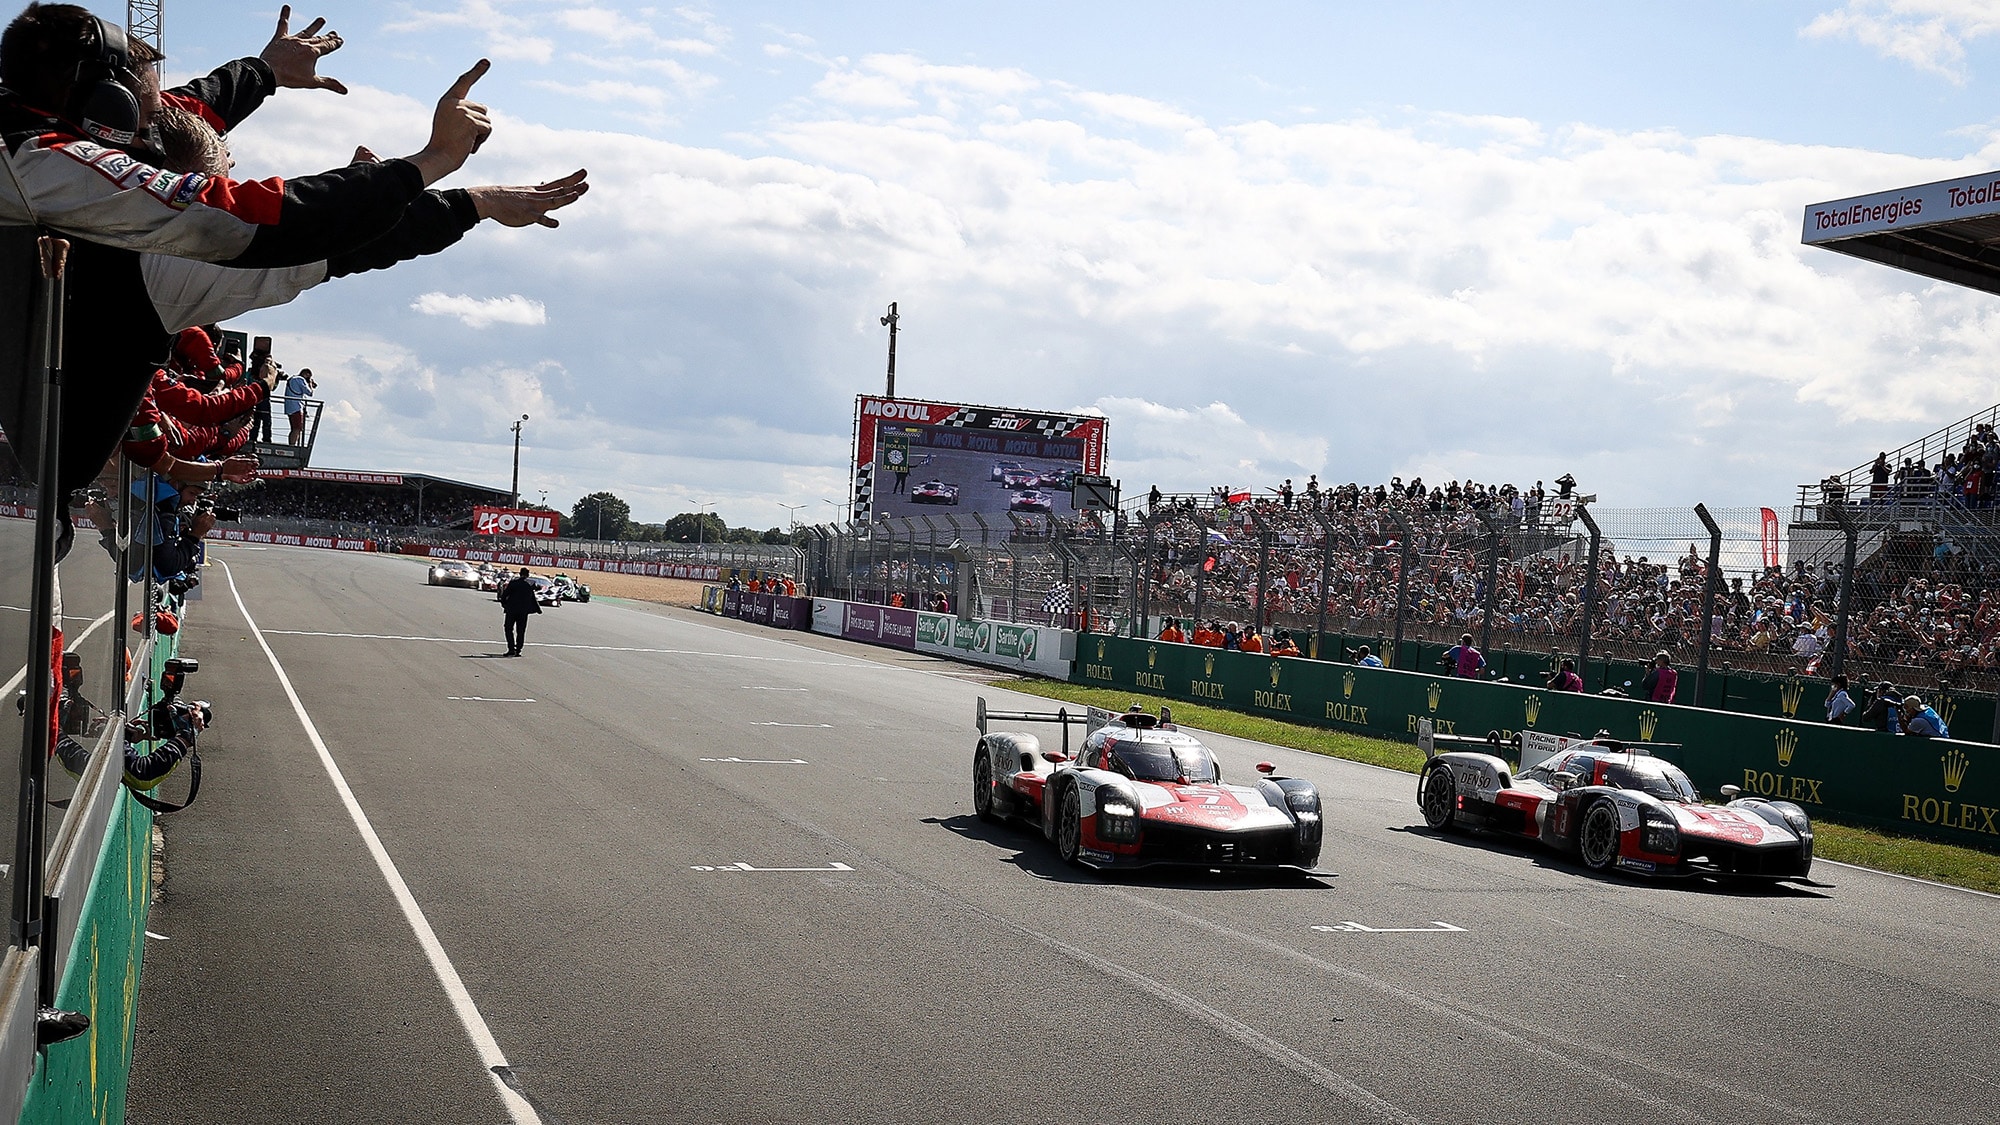 Toyotas cross the line to win the 2021 Le Mans 24 Hours